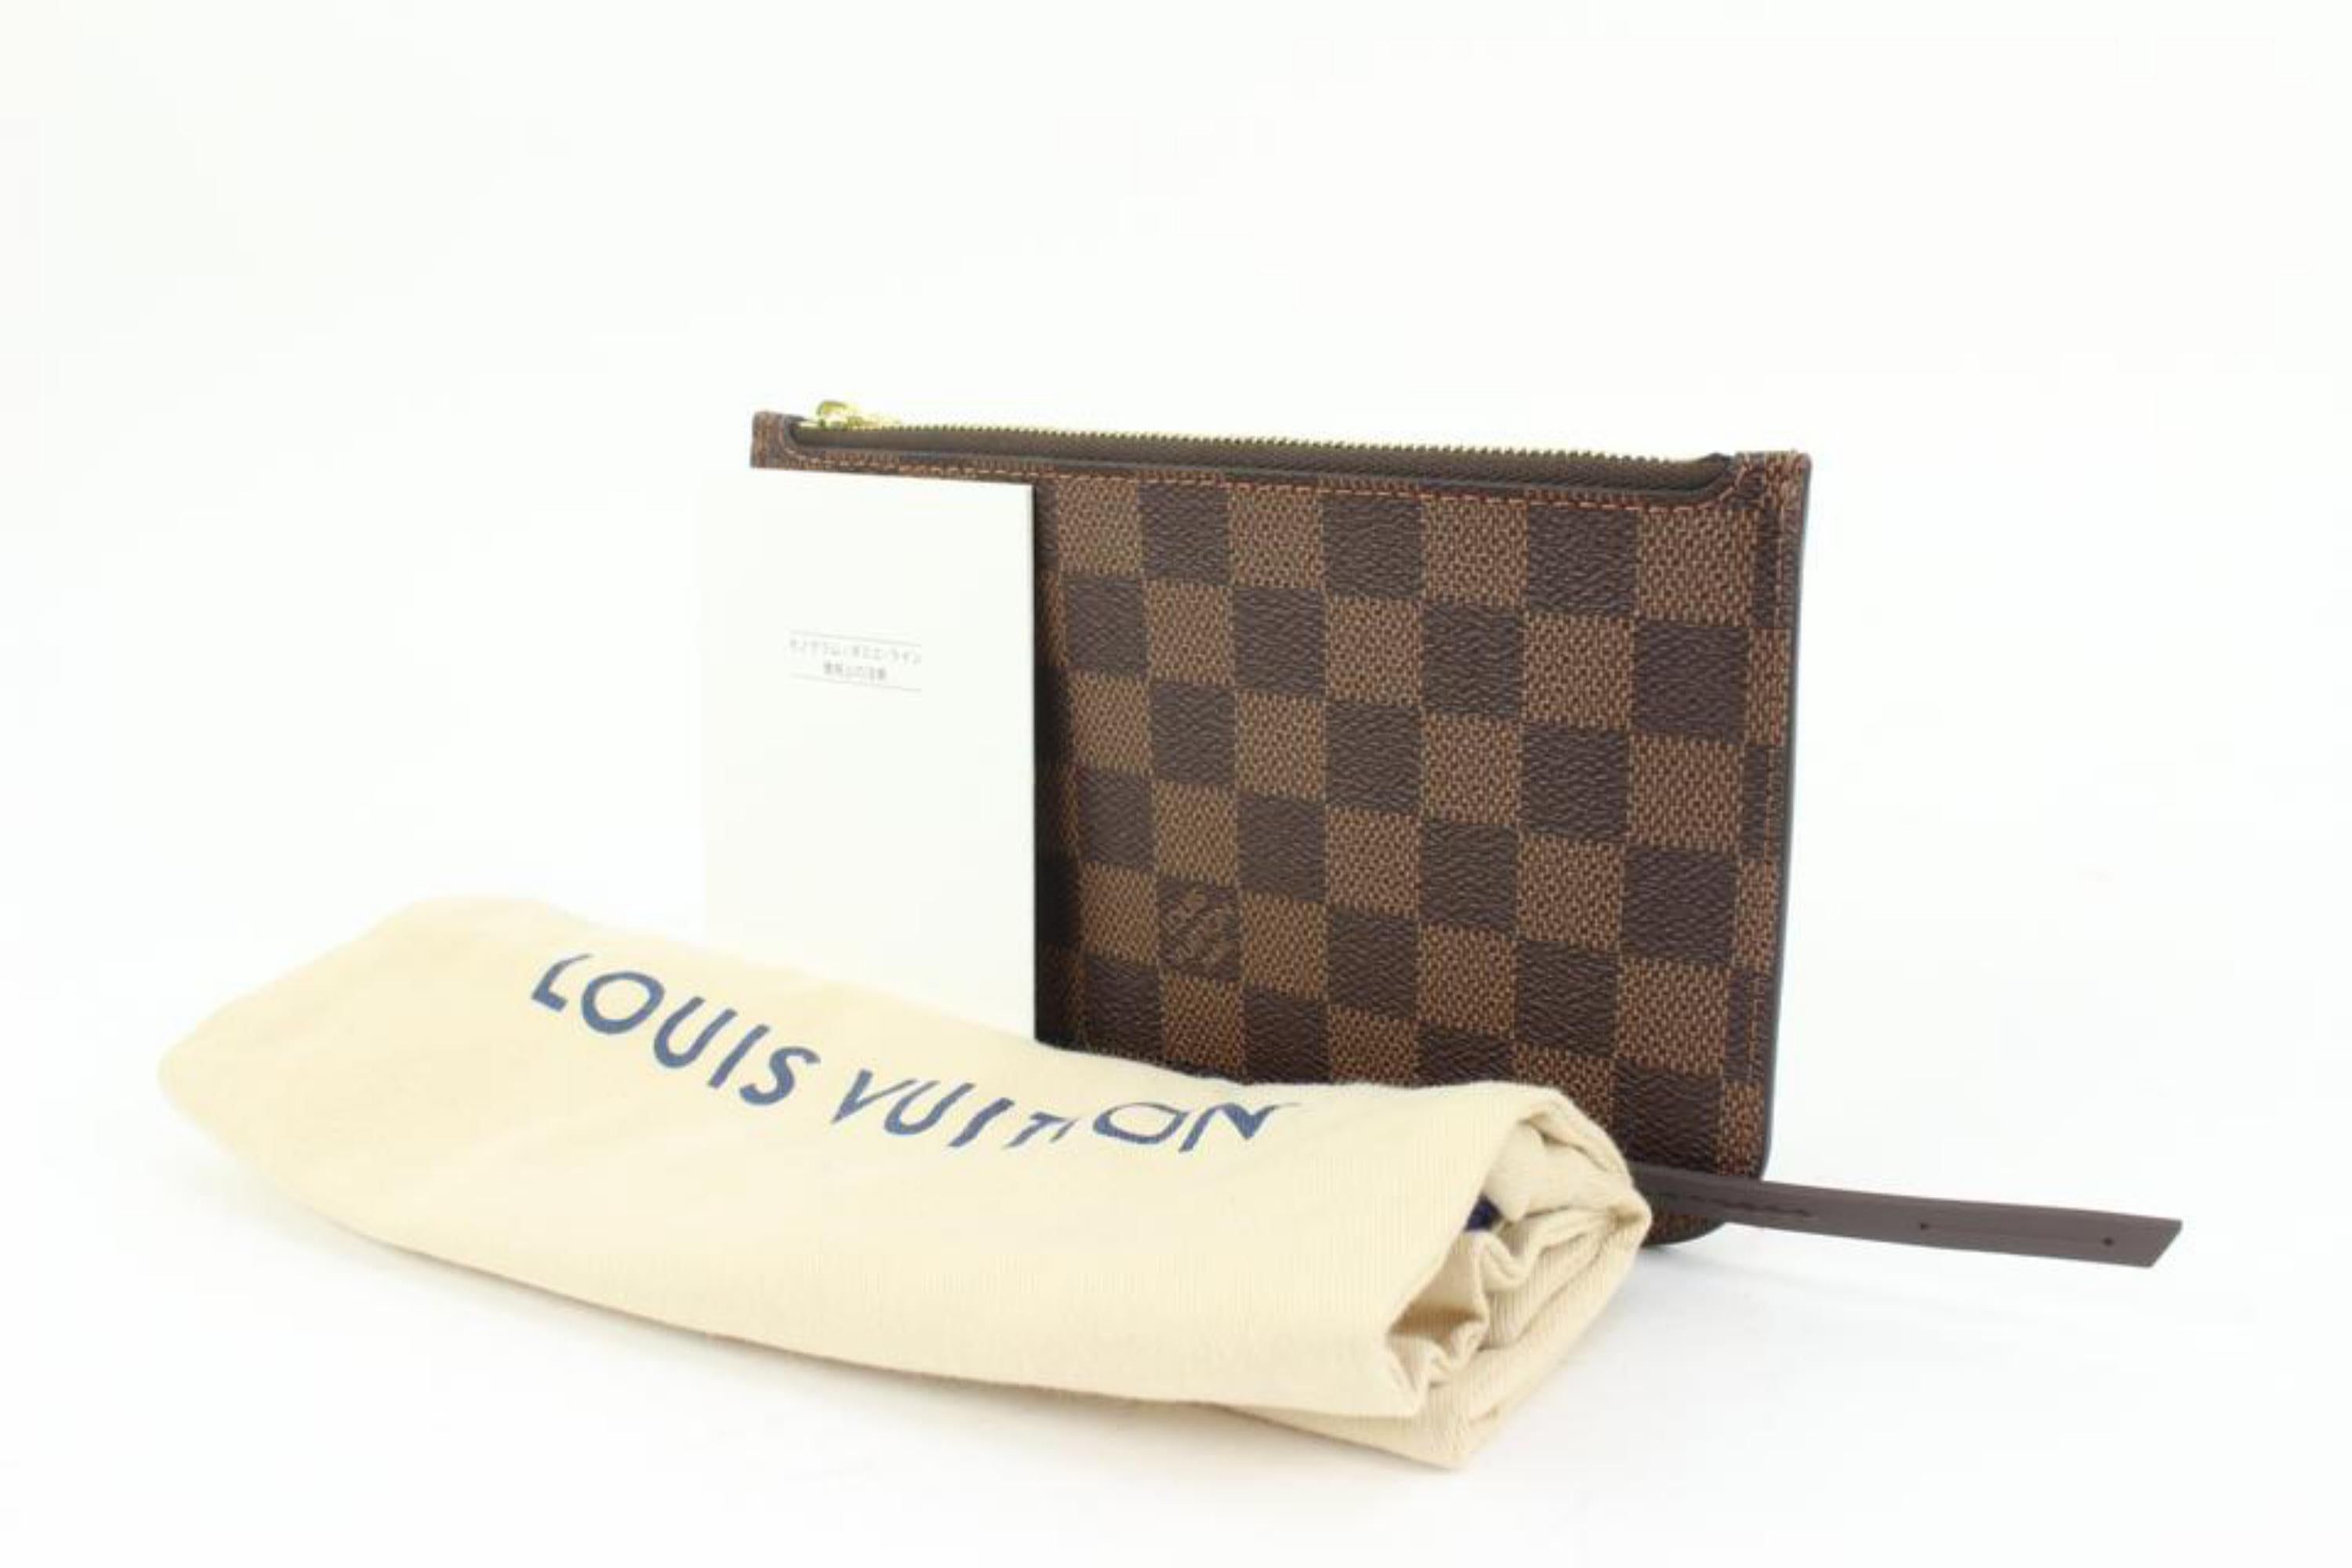 Louis Vuitton Small Damier Ebene Neverfull Pochette PM Wristlet Pouch 81lv39s
Date Code/Serial Number: AR3186
Made In: France
Measurements: Length:  7.5